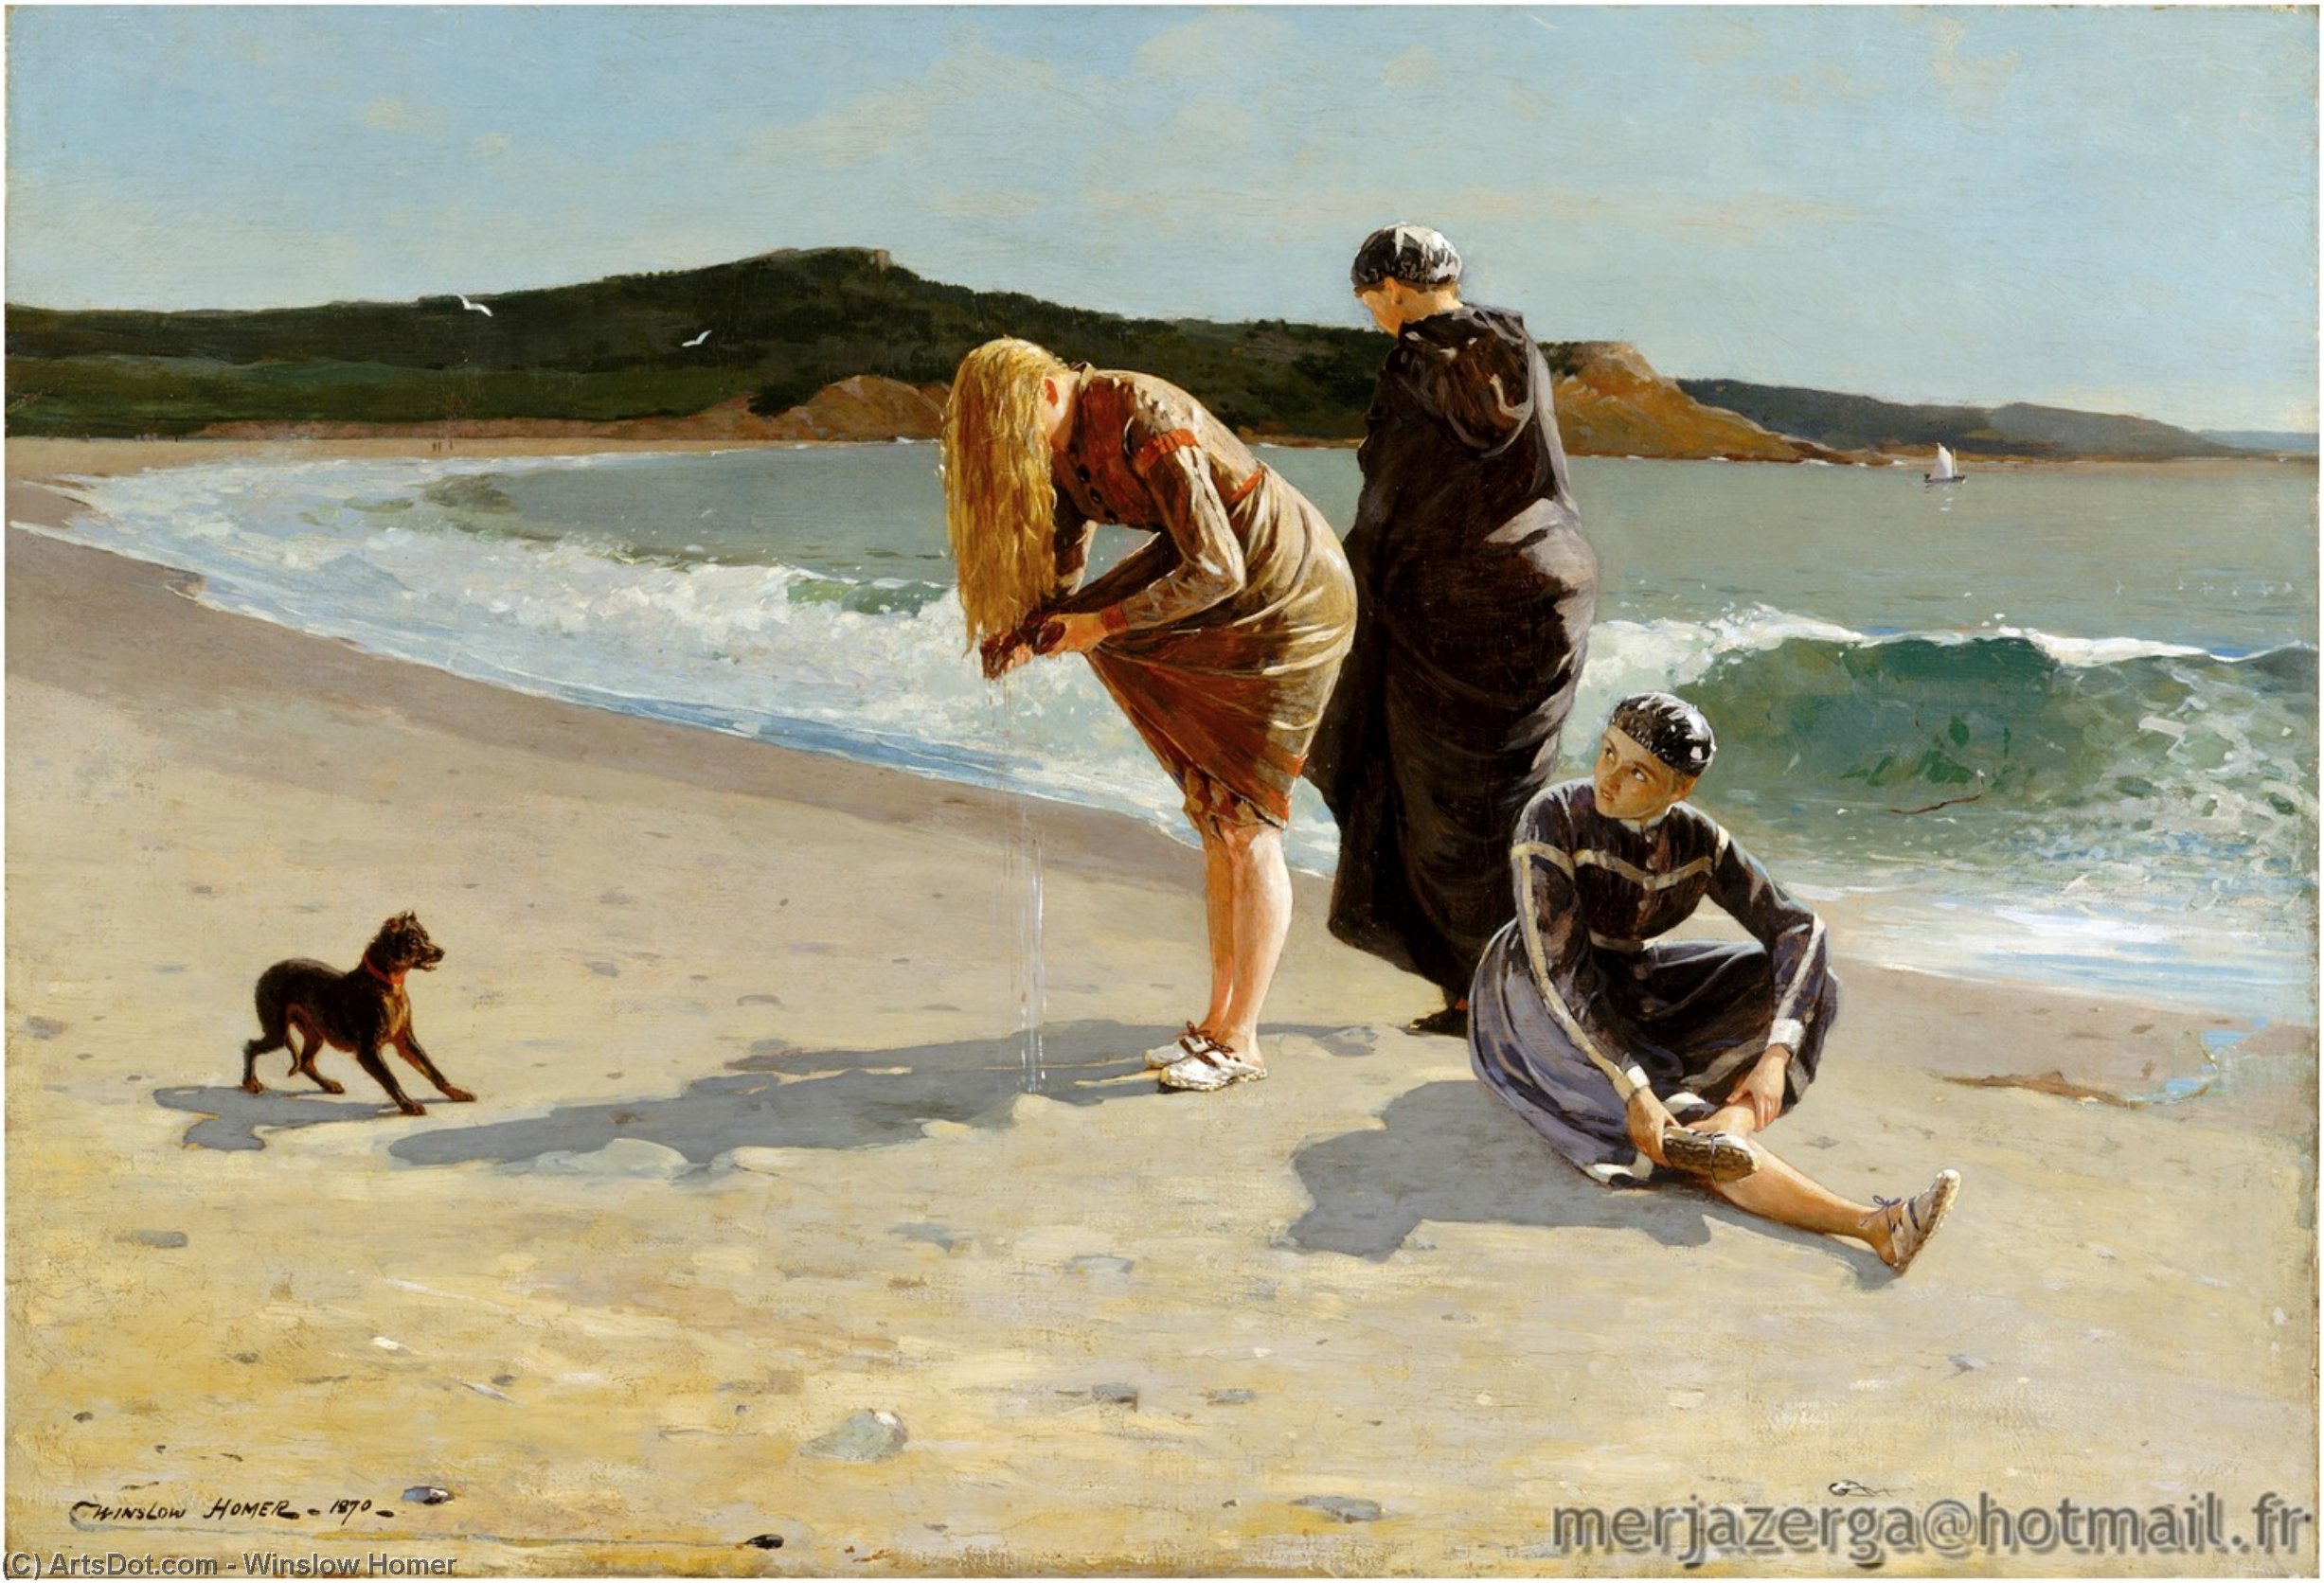 WikiOO.org - Encyclopedia of Fine Arts - Malba, Artwork Winslow Homer - Eagle Head, Manchester, Massachusetts (also known as High Tide)